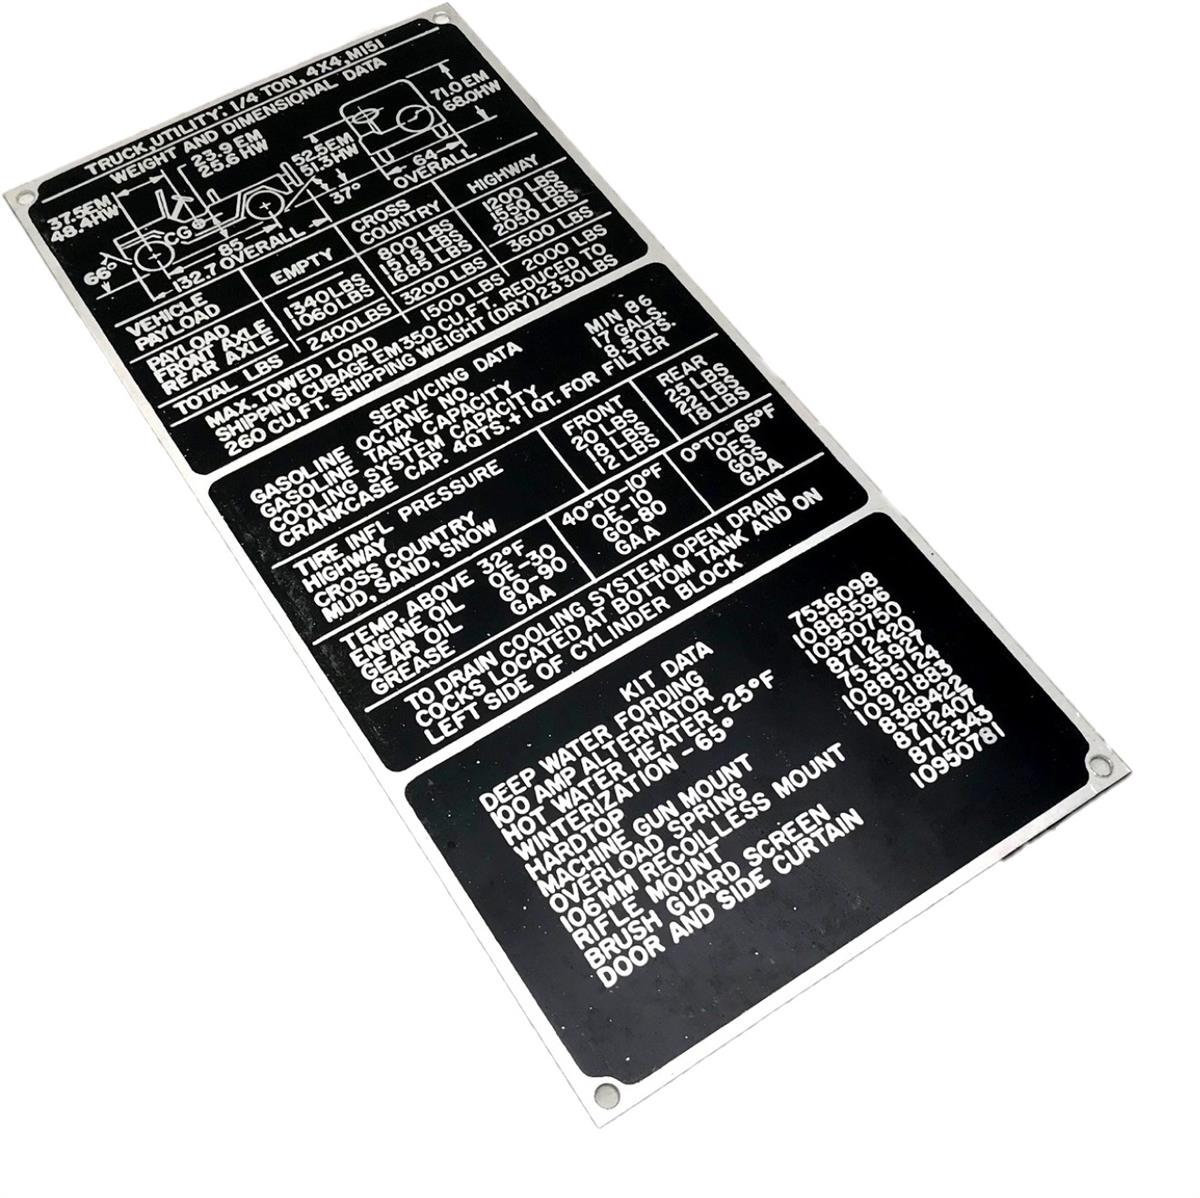 DT-546 | DT-546 M151 Weight and Dimensional Data Plate (5).jpg